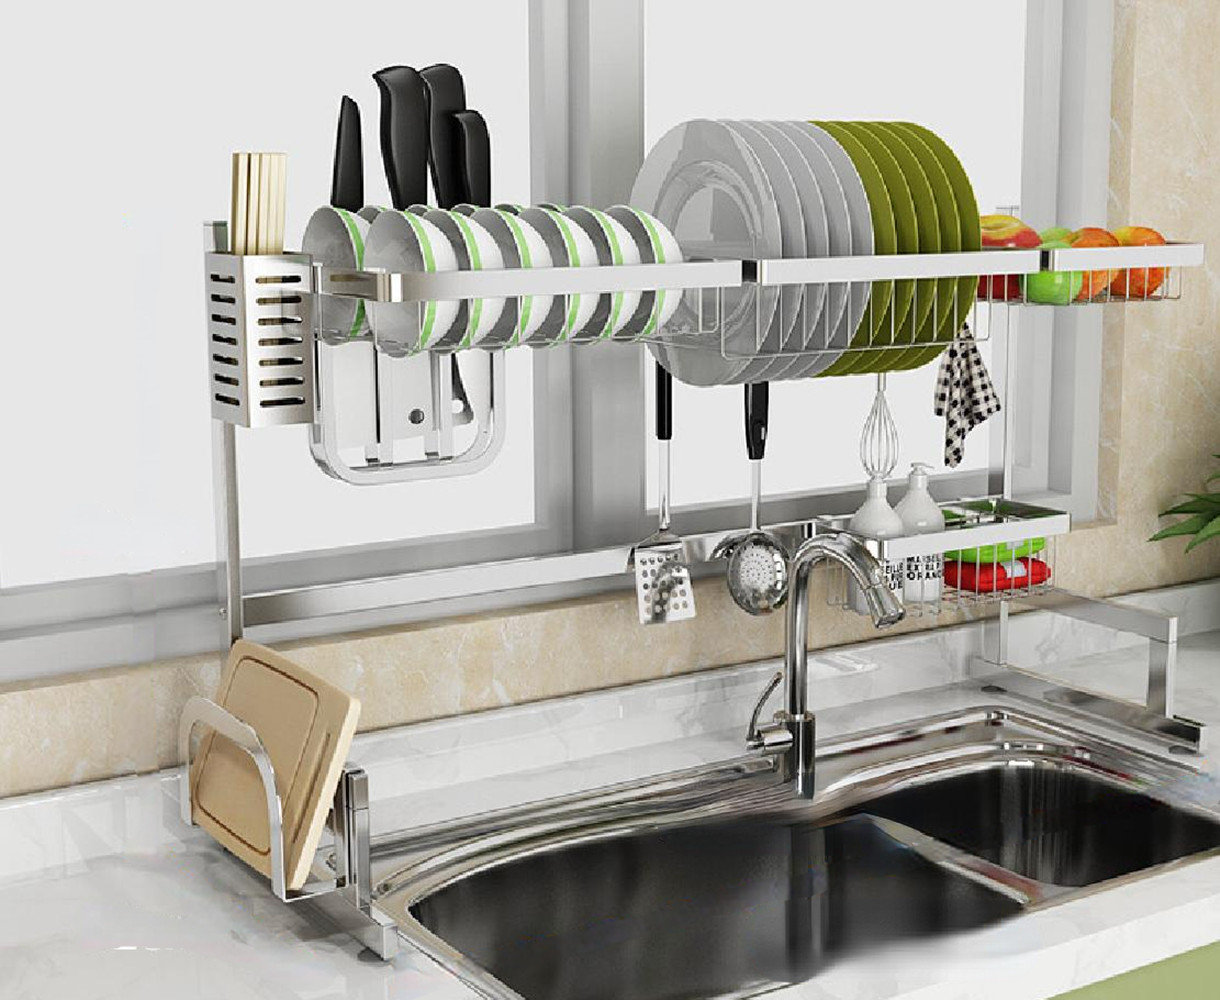 Kitchen Details Over the Sink Drying Rack with Utensil Holder 